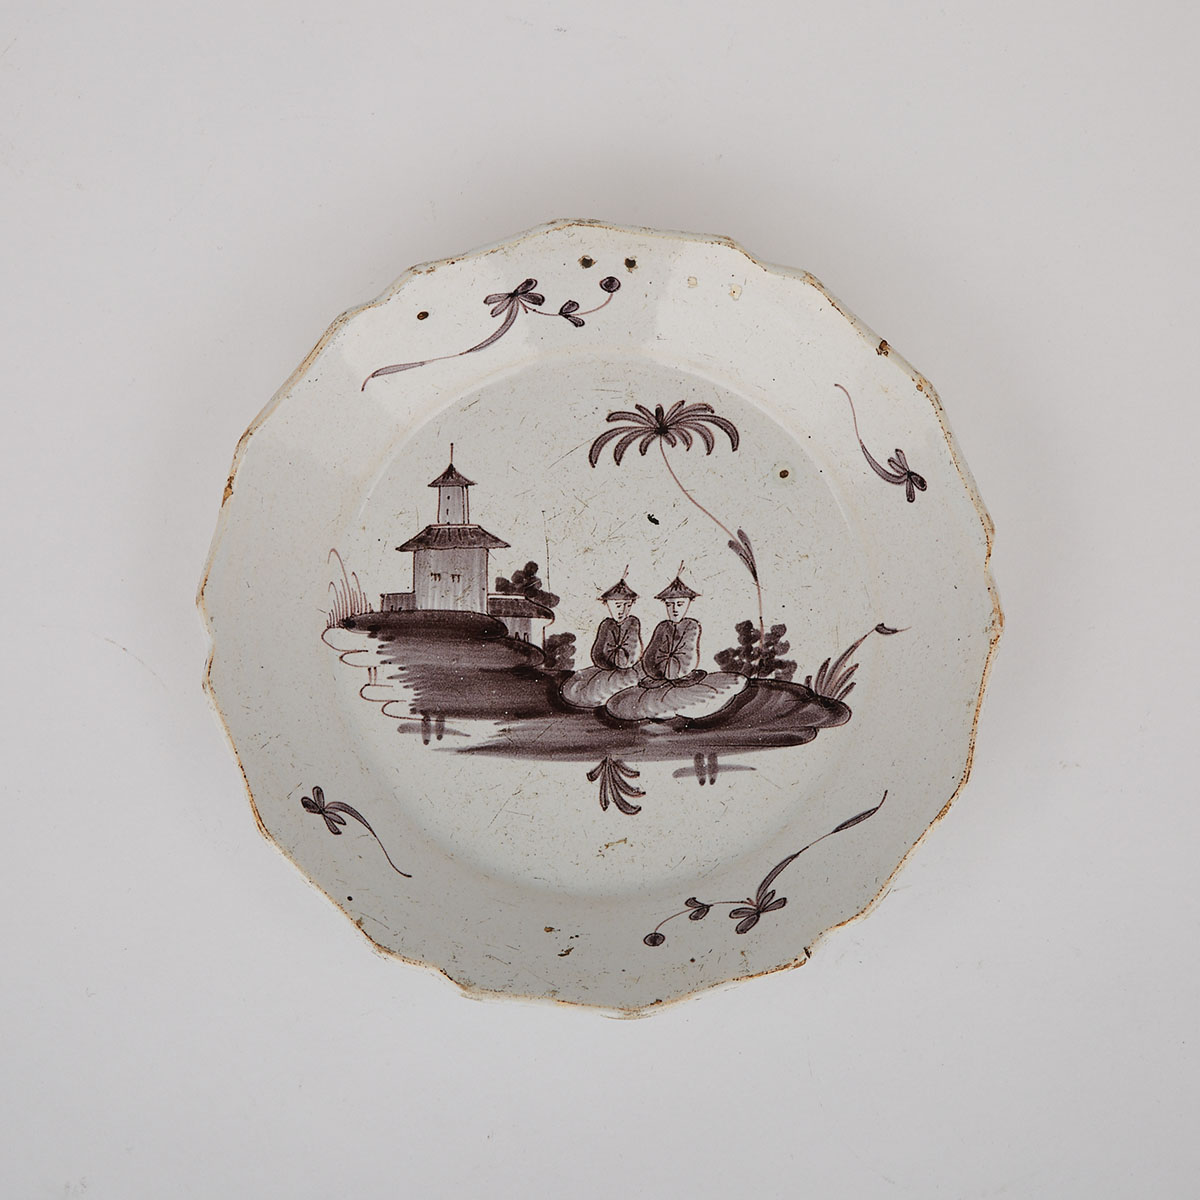 French Manganese Painted Chinoiserie Faience Plate, La Rochelle, 18th century